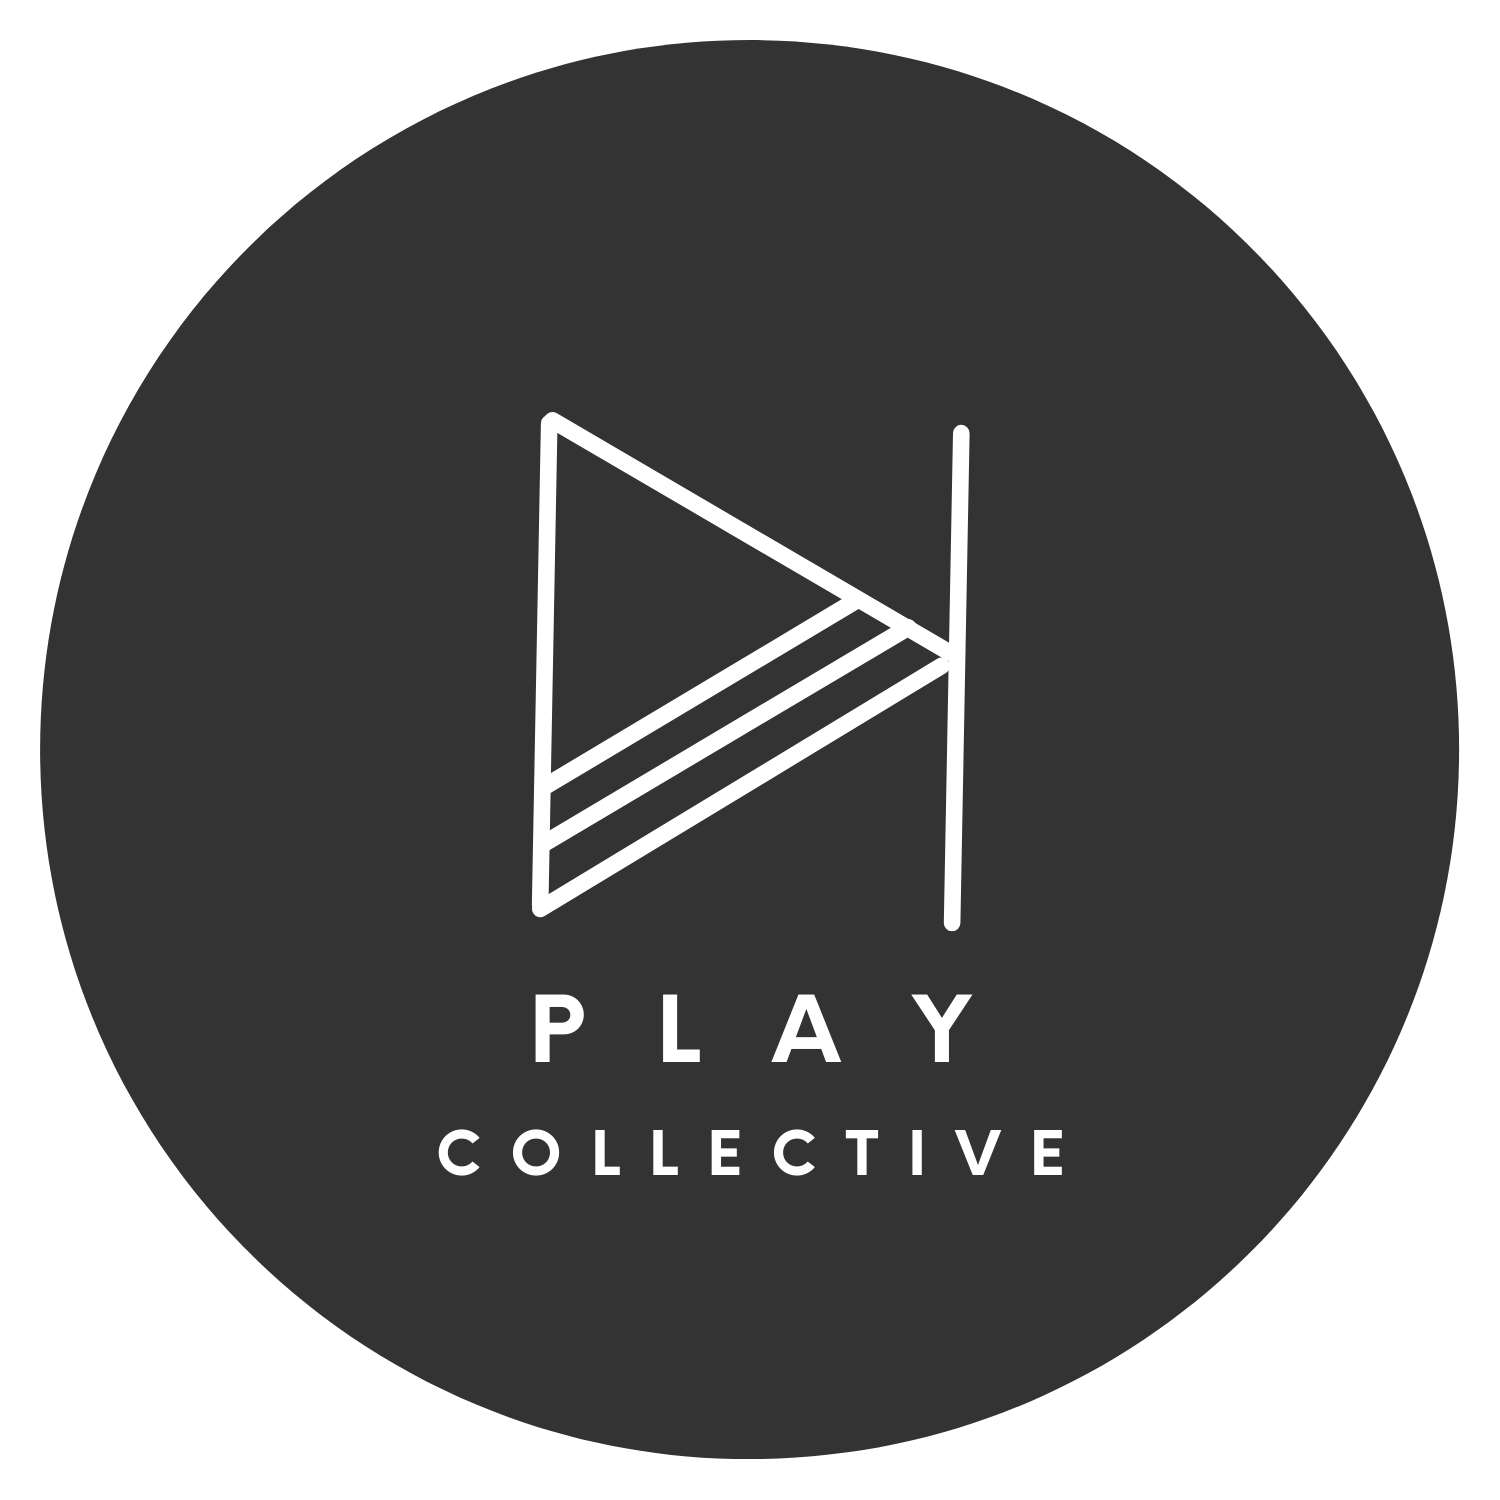 Play Colletive